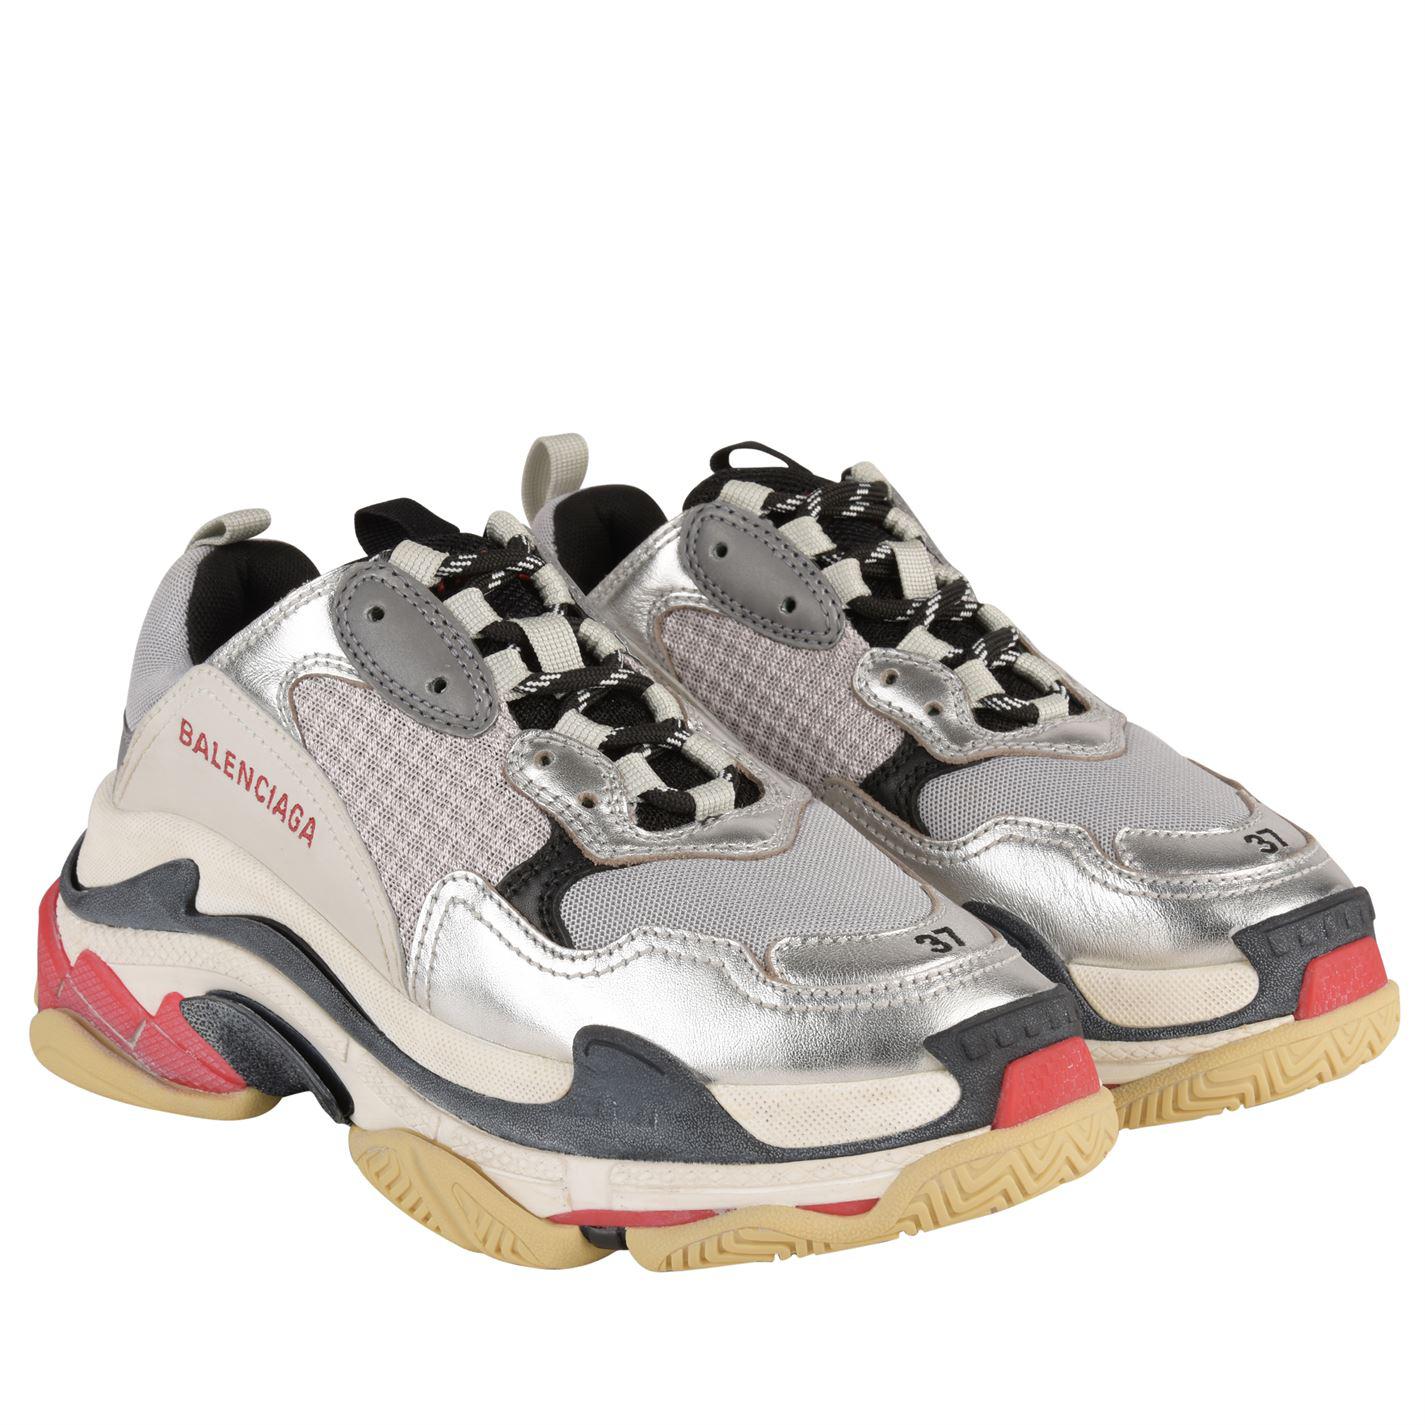 Fake Balenciaga Triple S Clear Sole Trainers Sneakers Grey